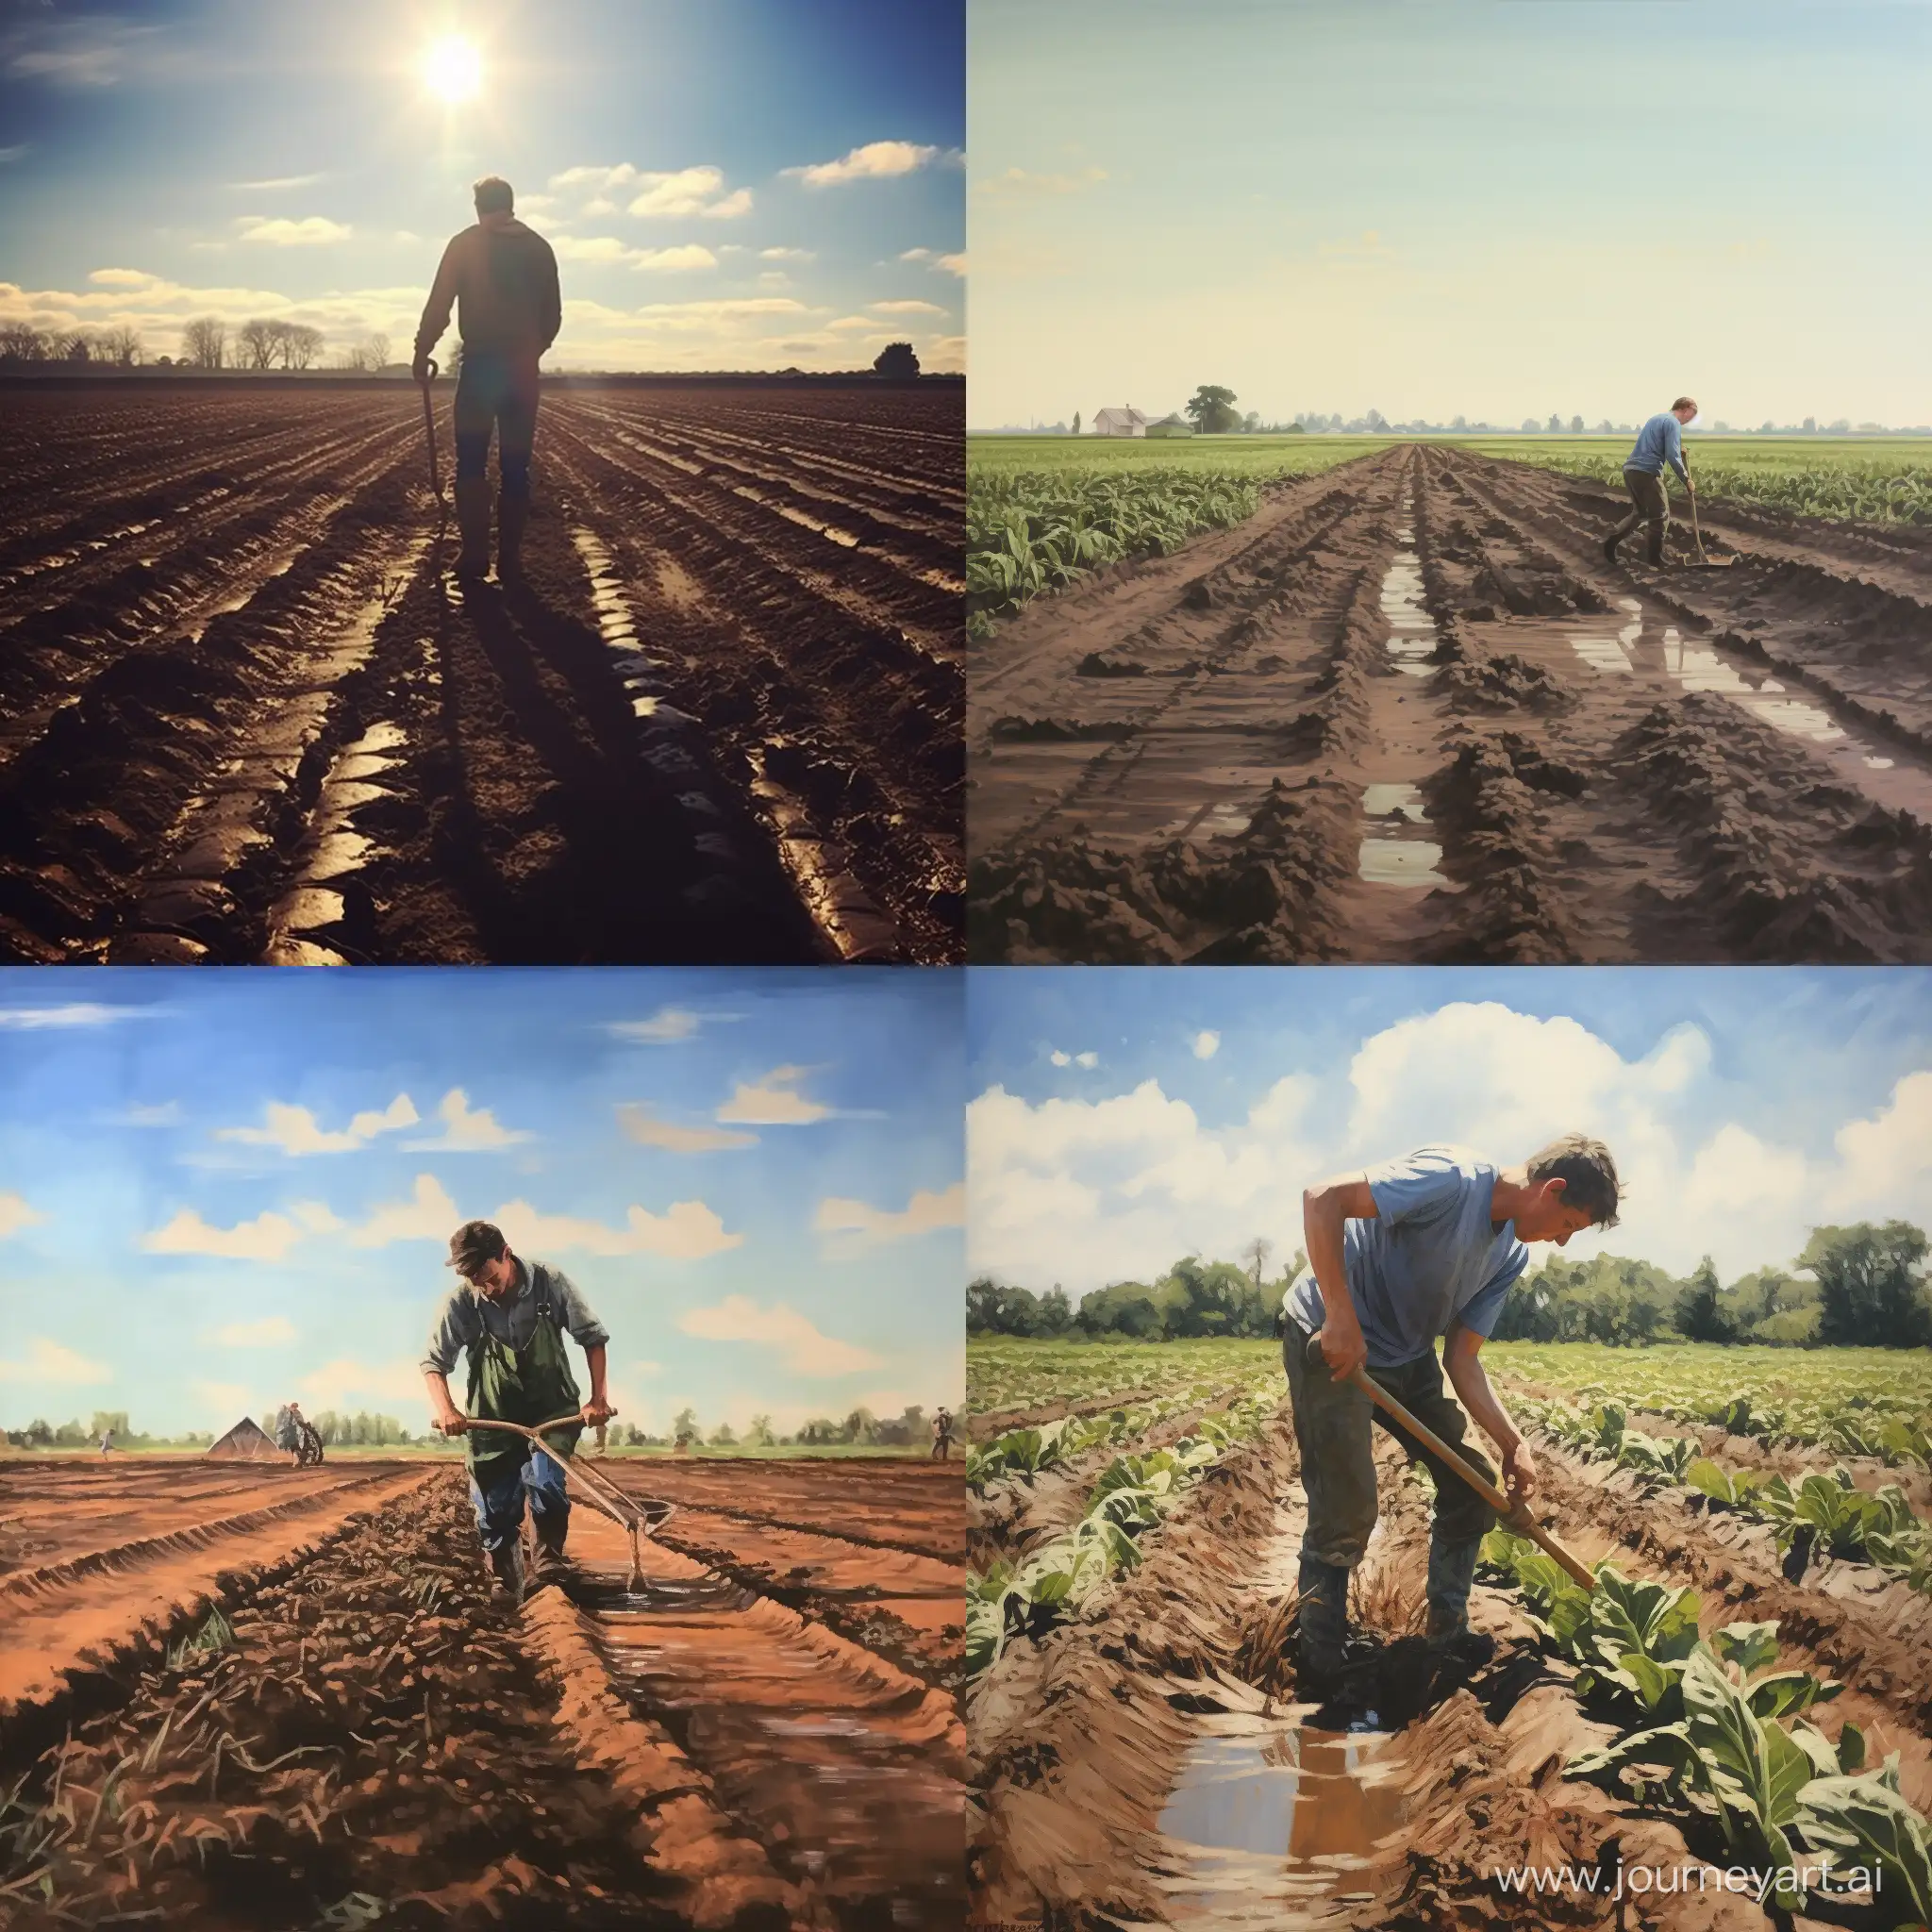 Midday-Field-Hoeing-Hard-Work-and-Sweat-for-a-Bountiful-Harvest